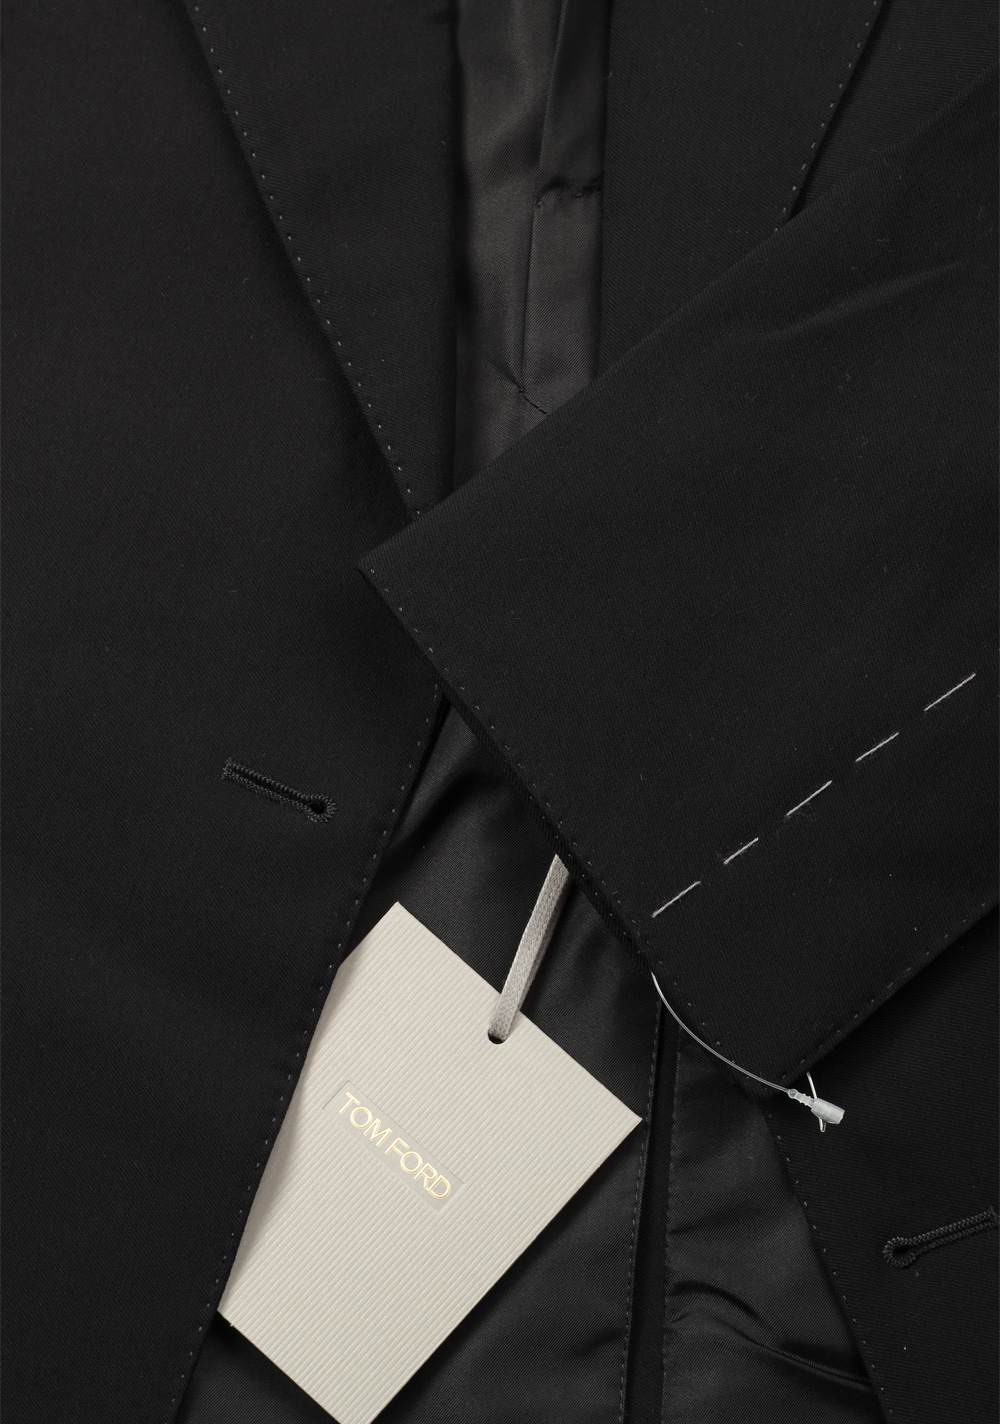 TOM FORD Shelton Double Breasted Solid Black Suit Size 50 / 40R U.S. | Costume Limité